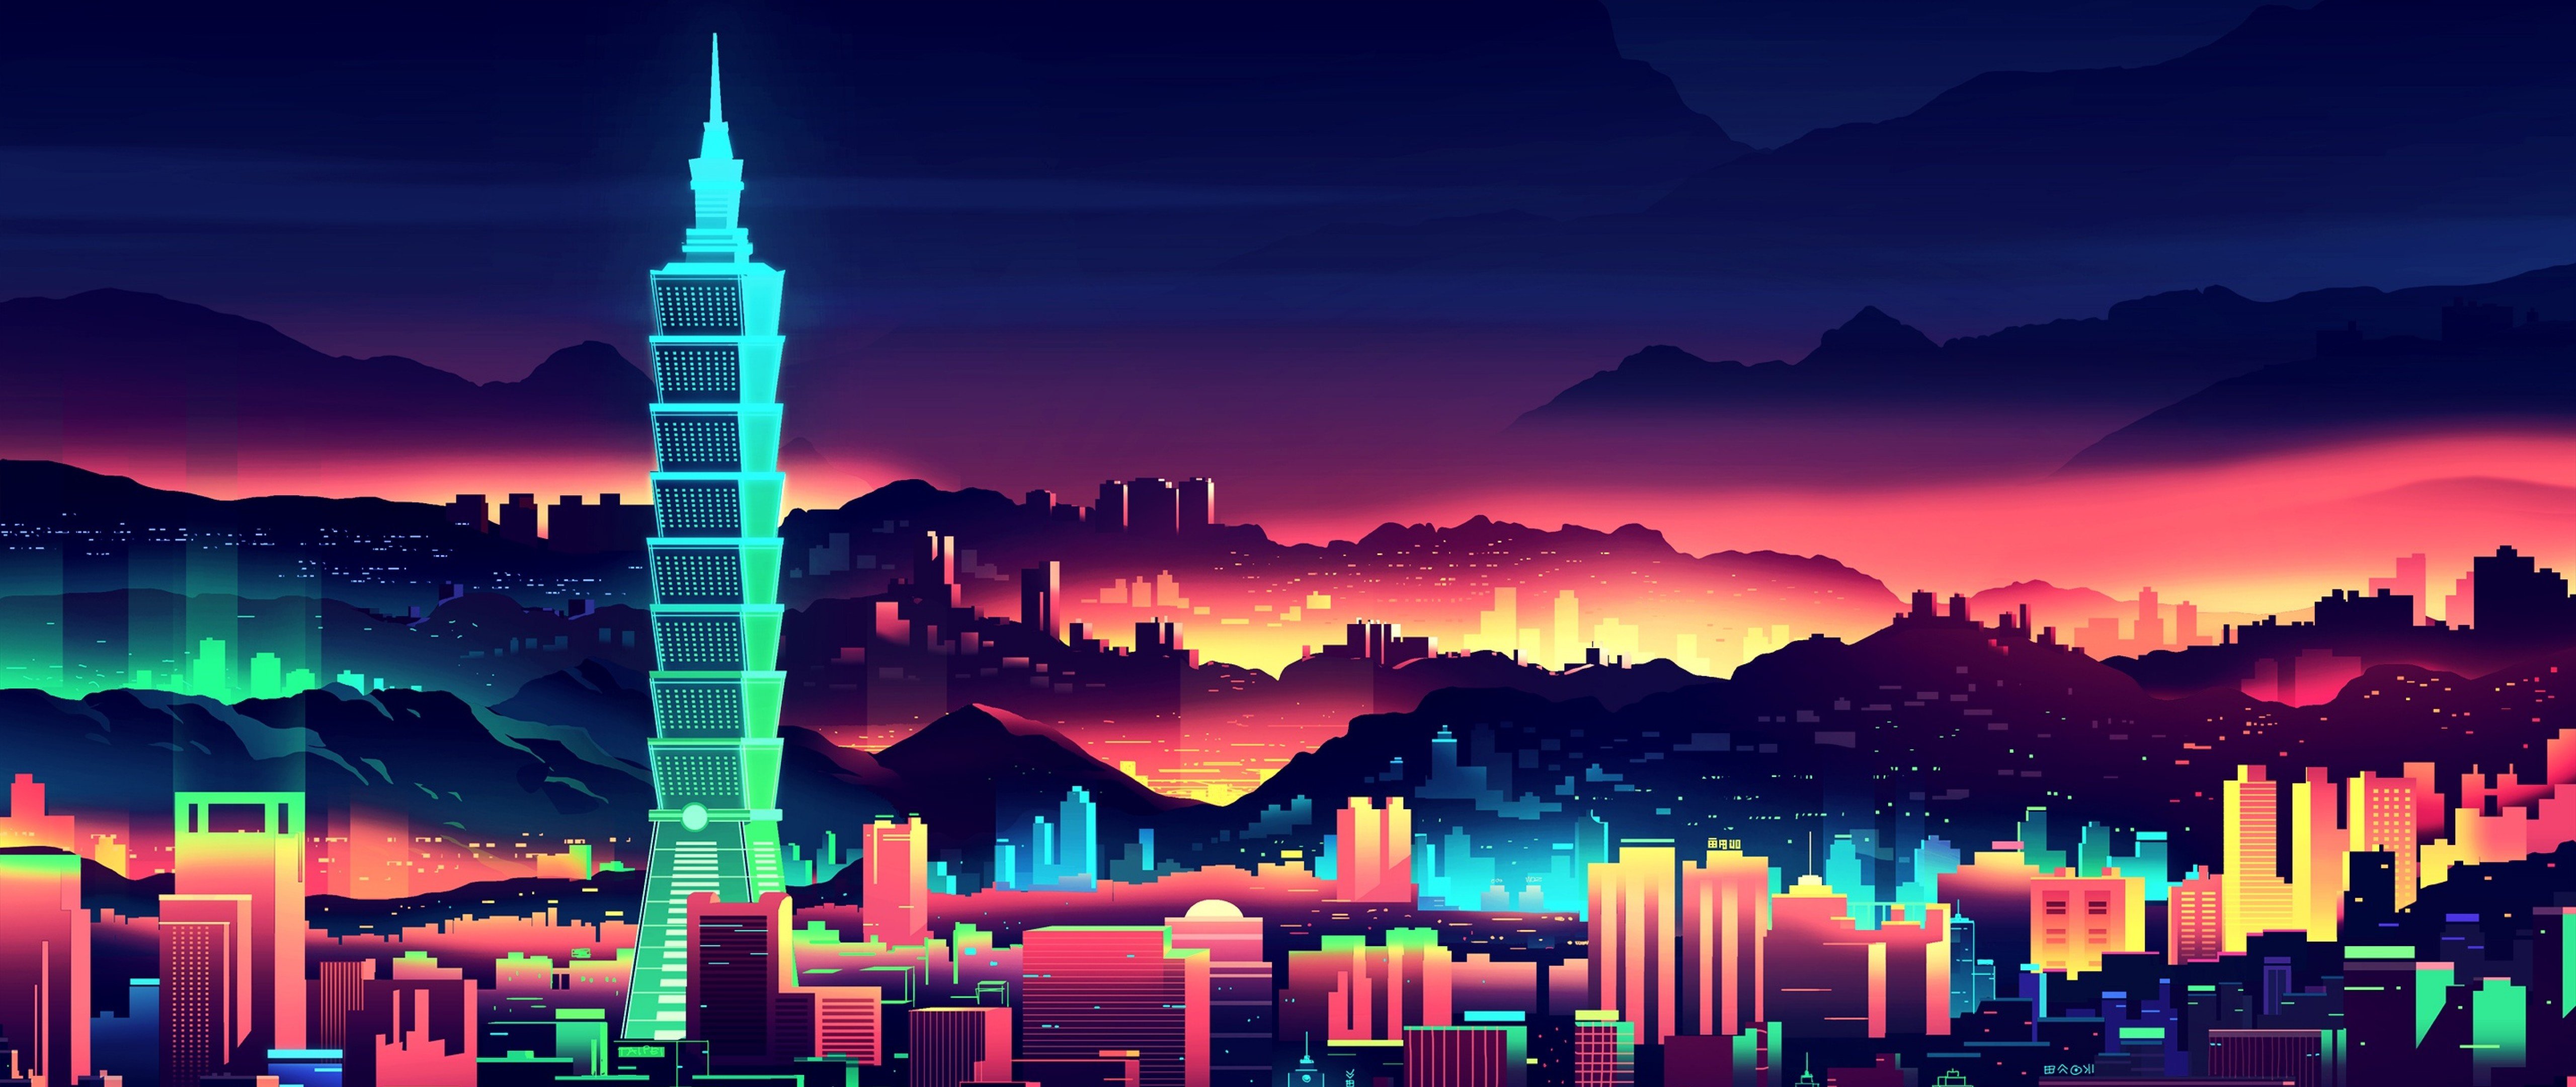 Neon City Wallpapers for Desktop and Mobiles 4K Ultra HD Wide TV